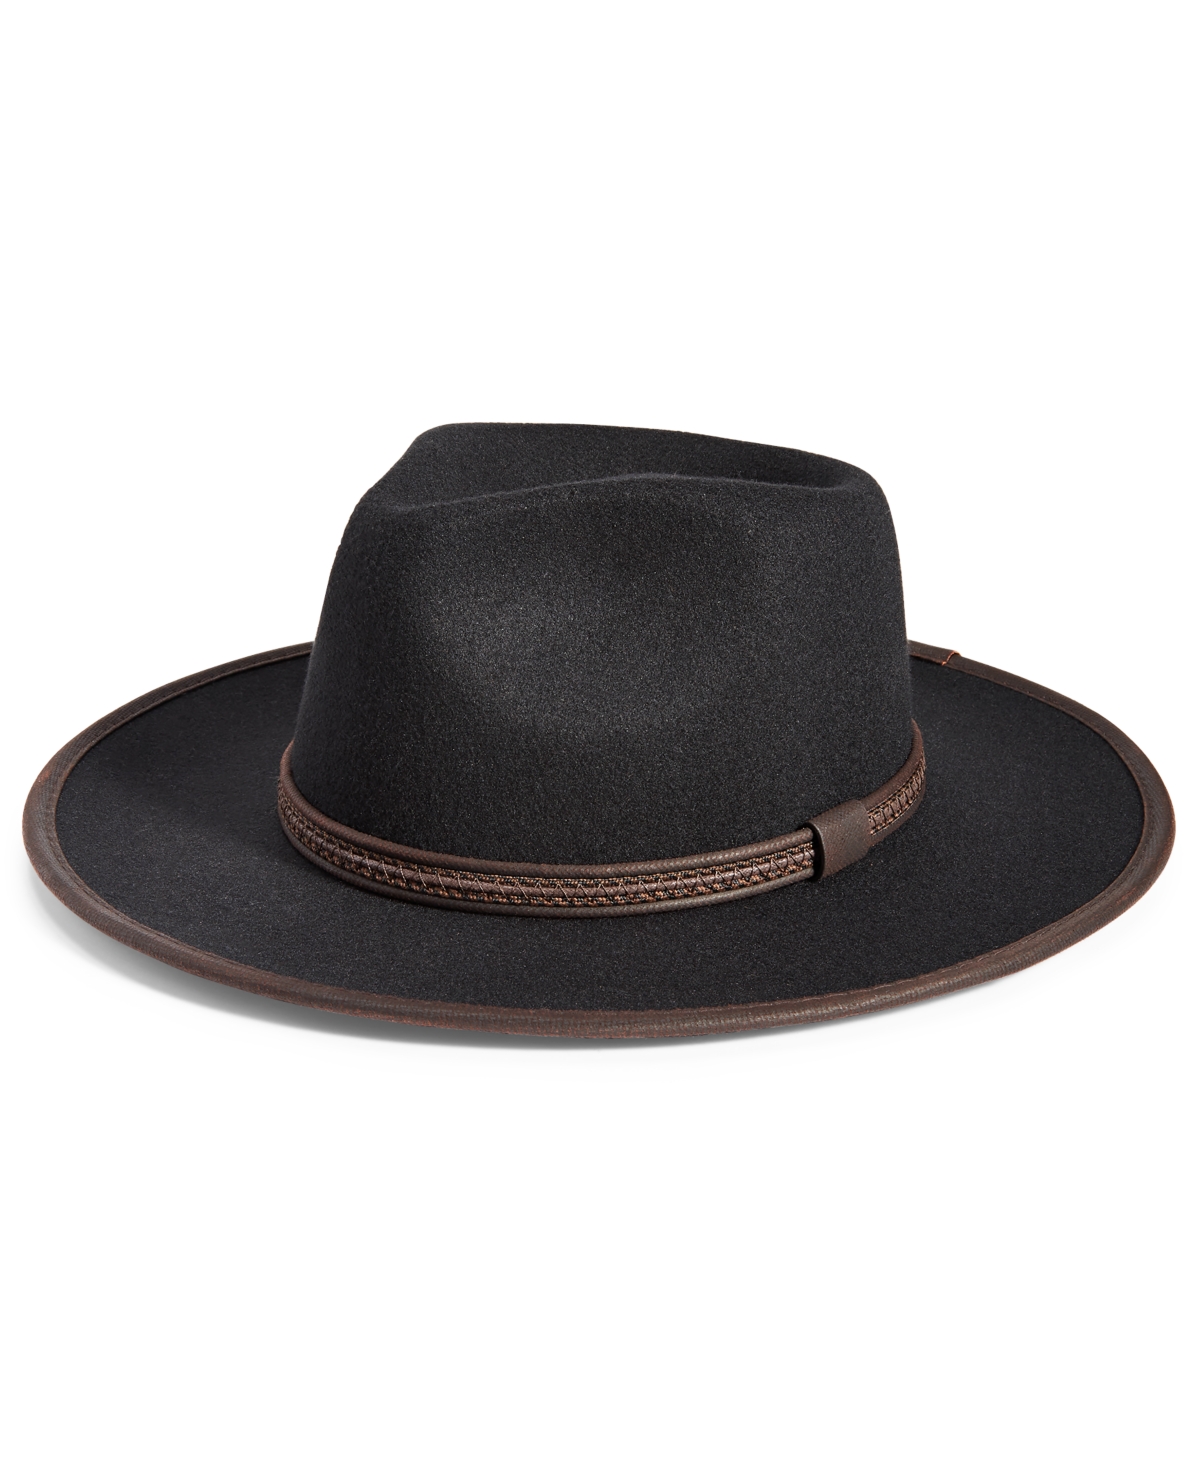 Men's Provato Knit Faux-Wool Safari Hat with Faux-Leather Band - Black